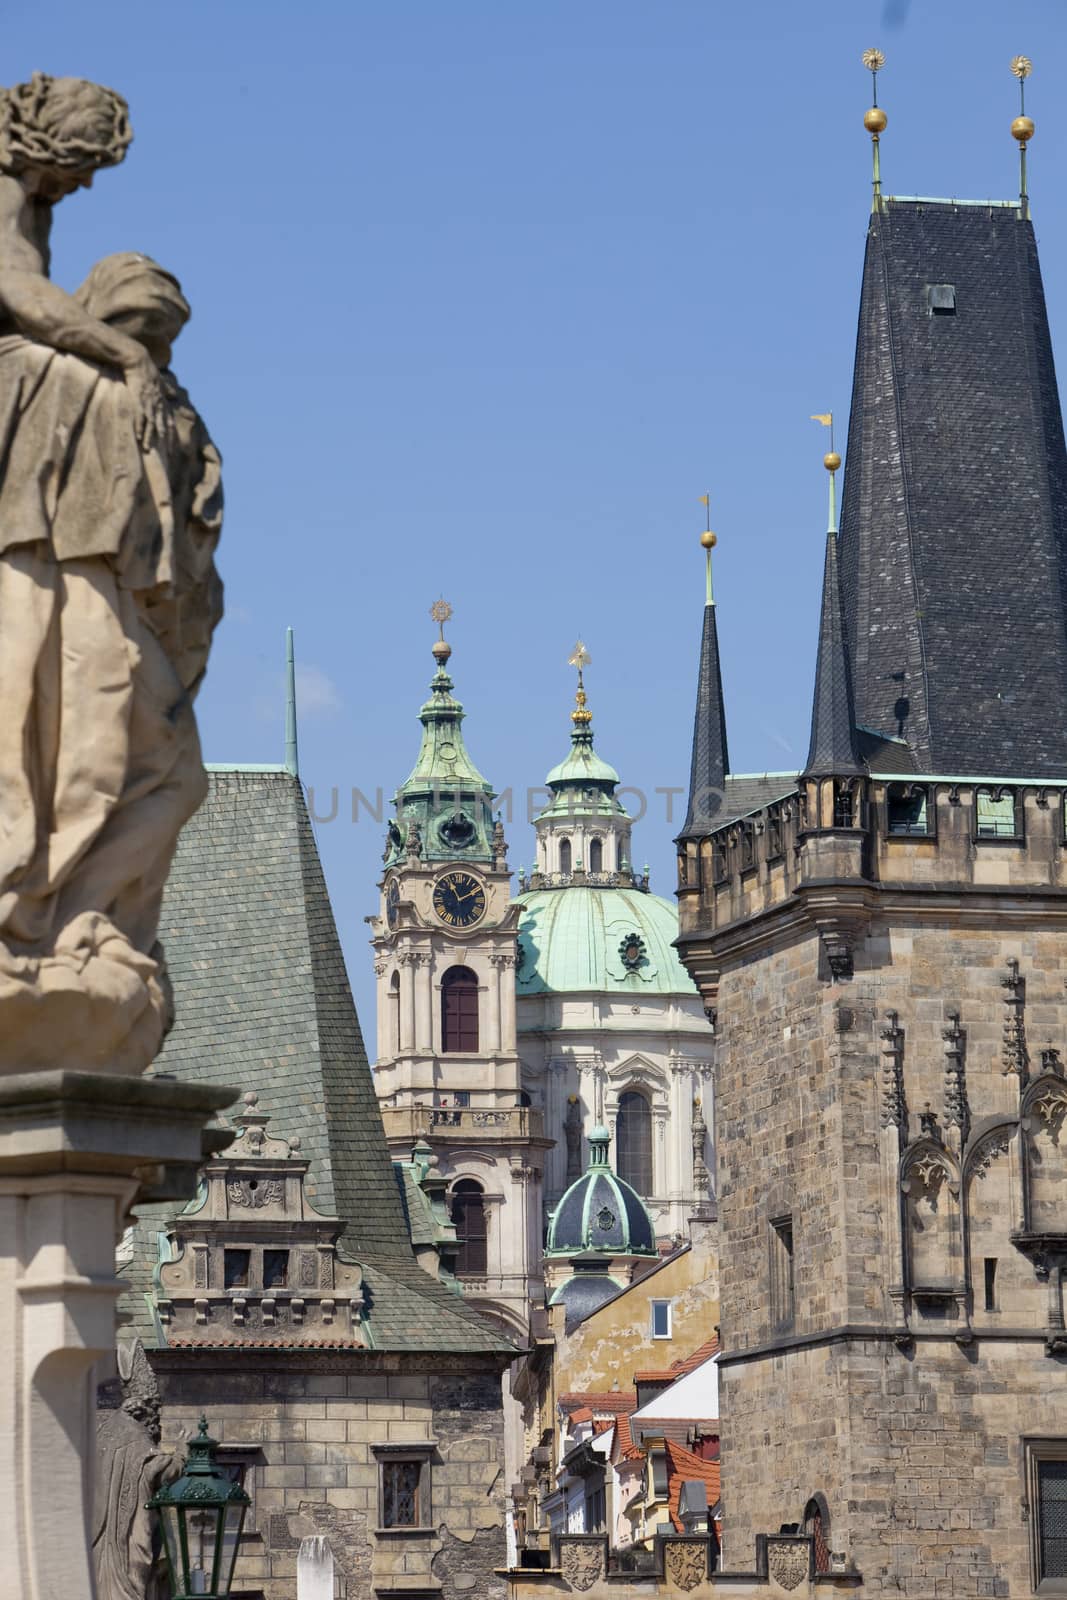 prague - different architectural styles-st. nicolas church and charles bridge tower